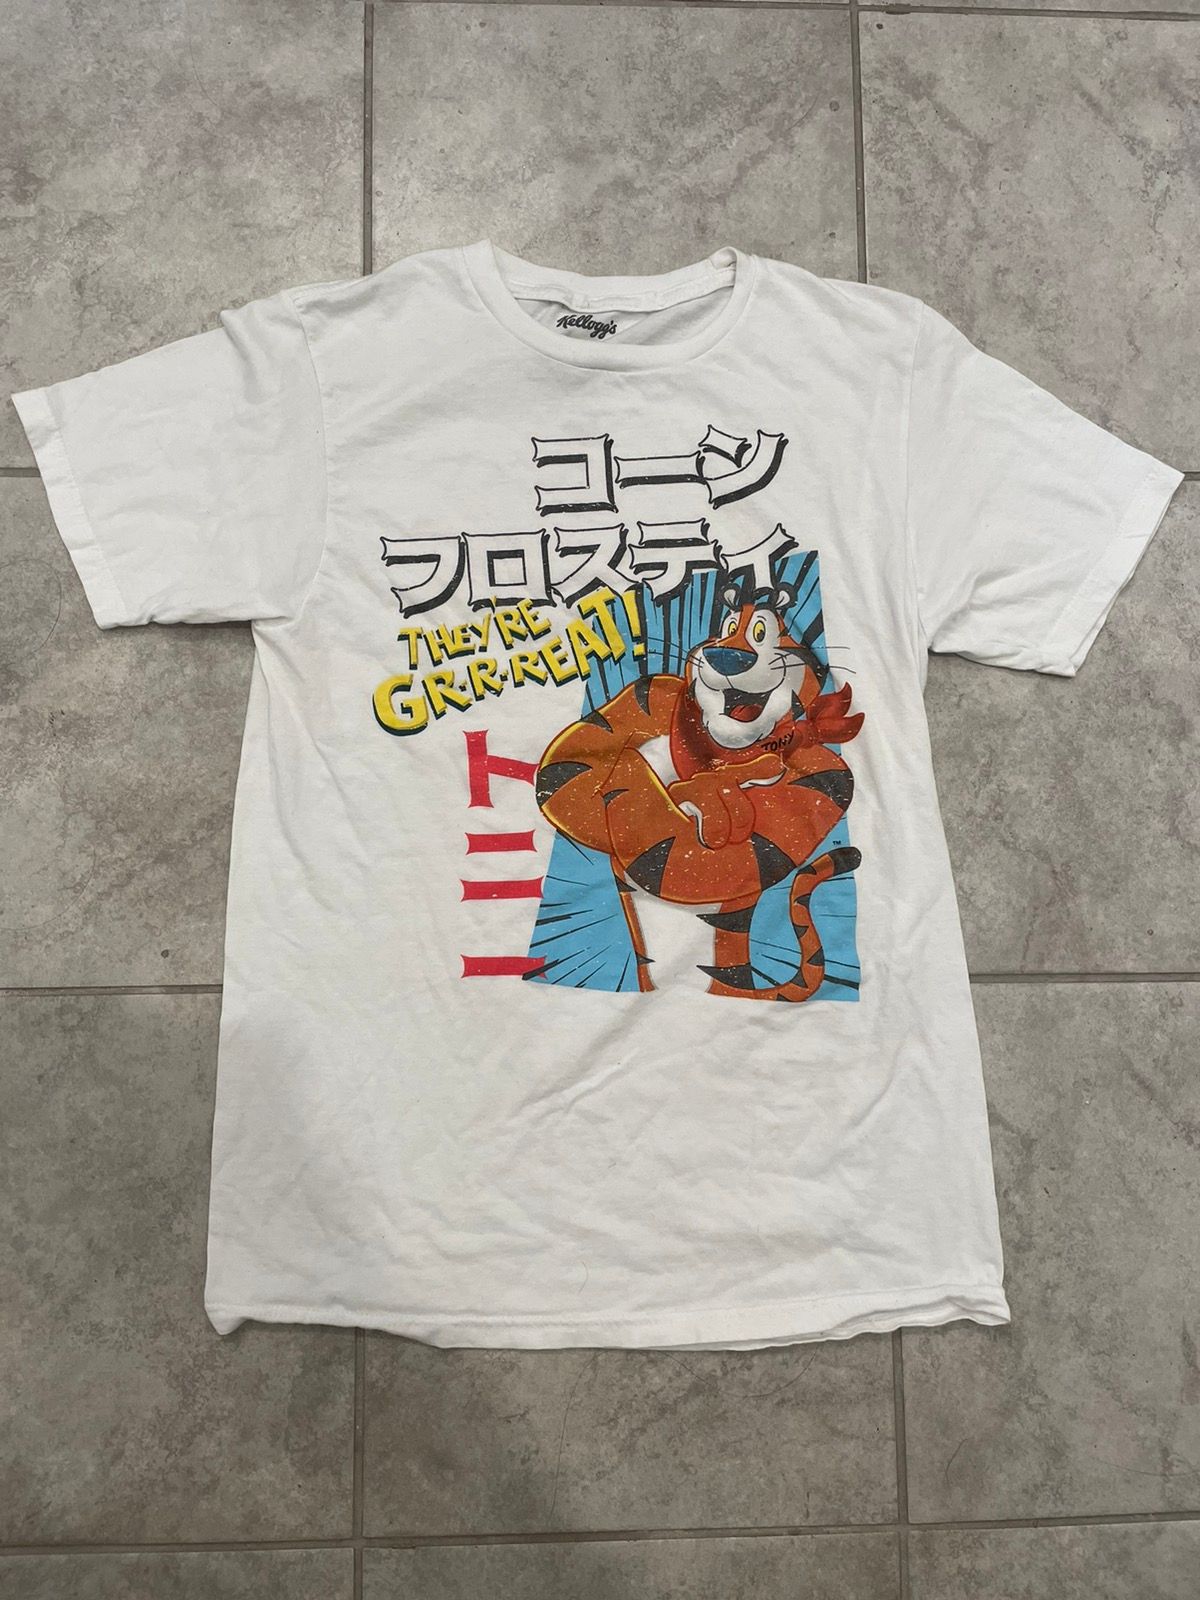 Vintage Kellogg’s “Japanese Frosted Flakes” Tee Size US S / EU 44-46 / 1 - 1 Preview